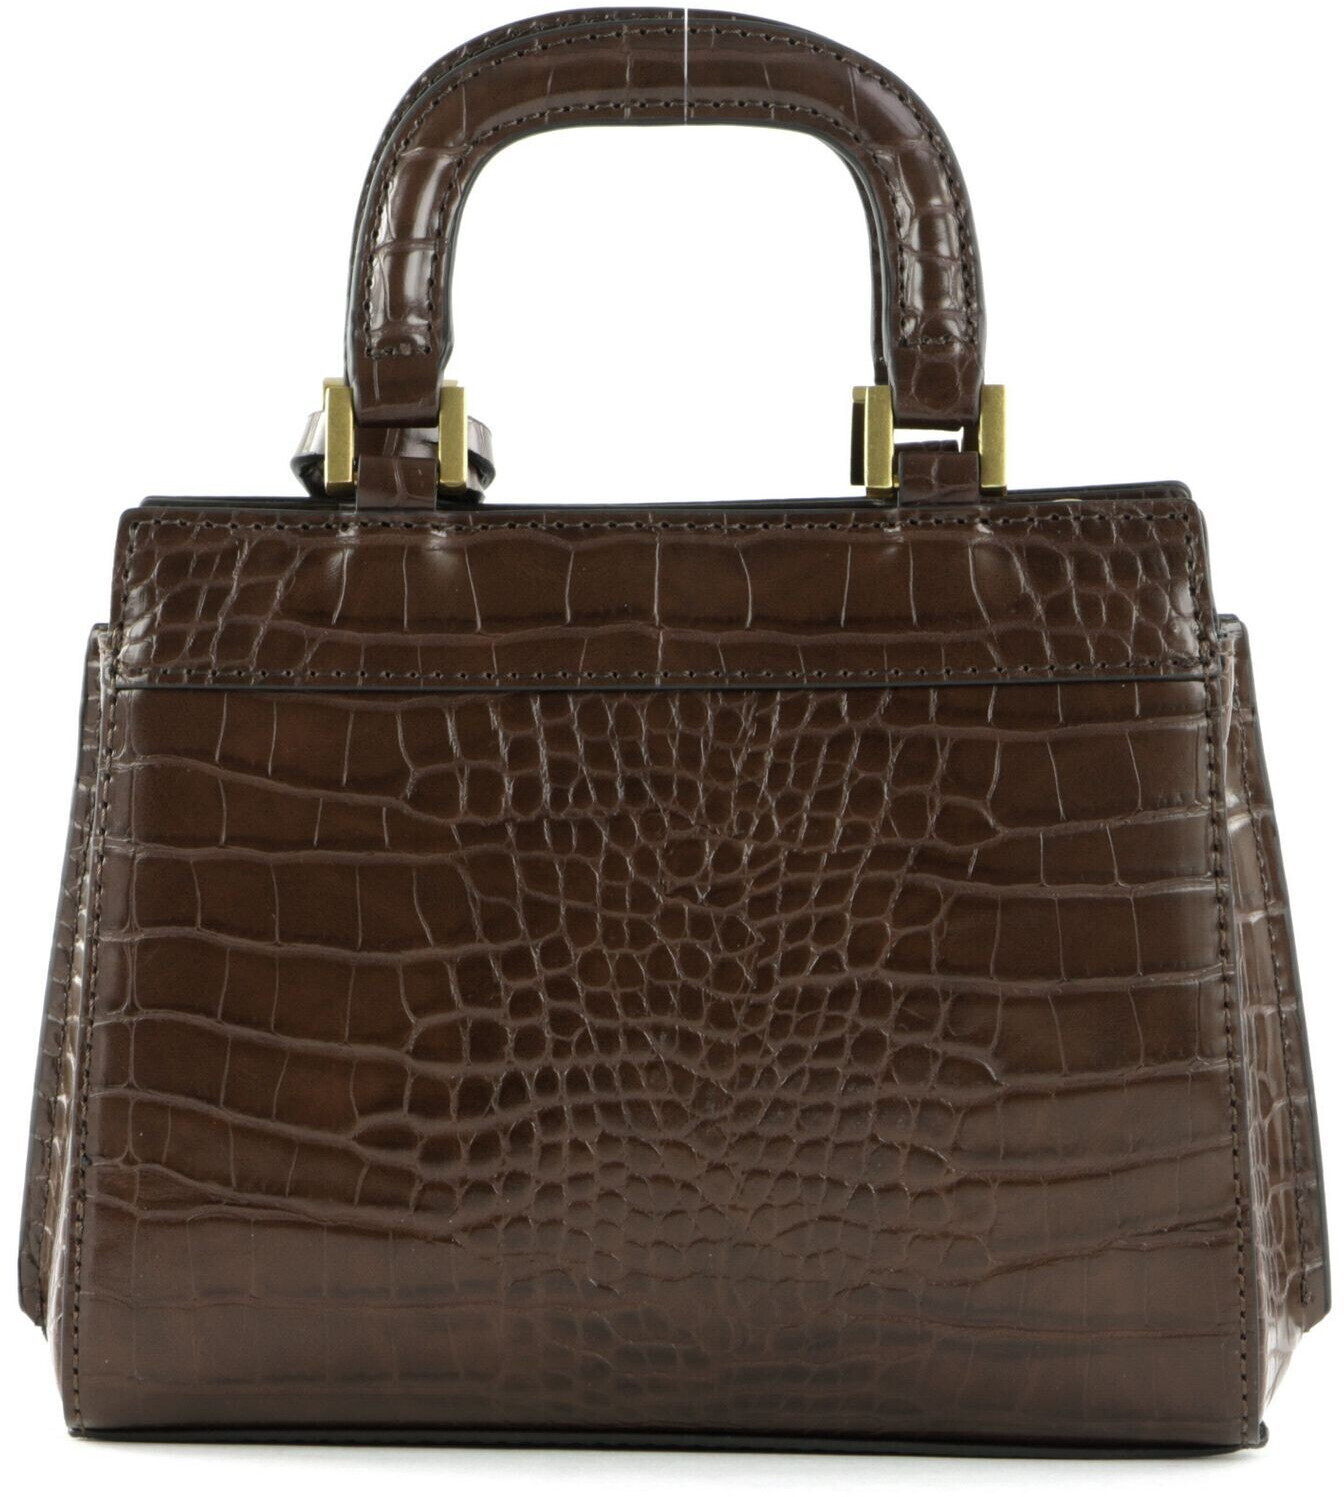 Buy Guess Katey Mini Satchel brown from £70.56 (Today) – Best Deals on ...